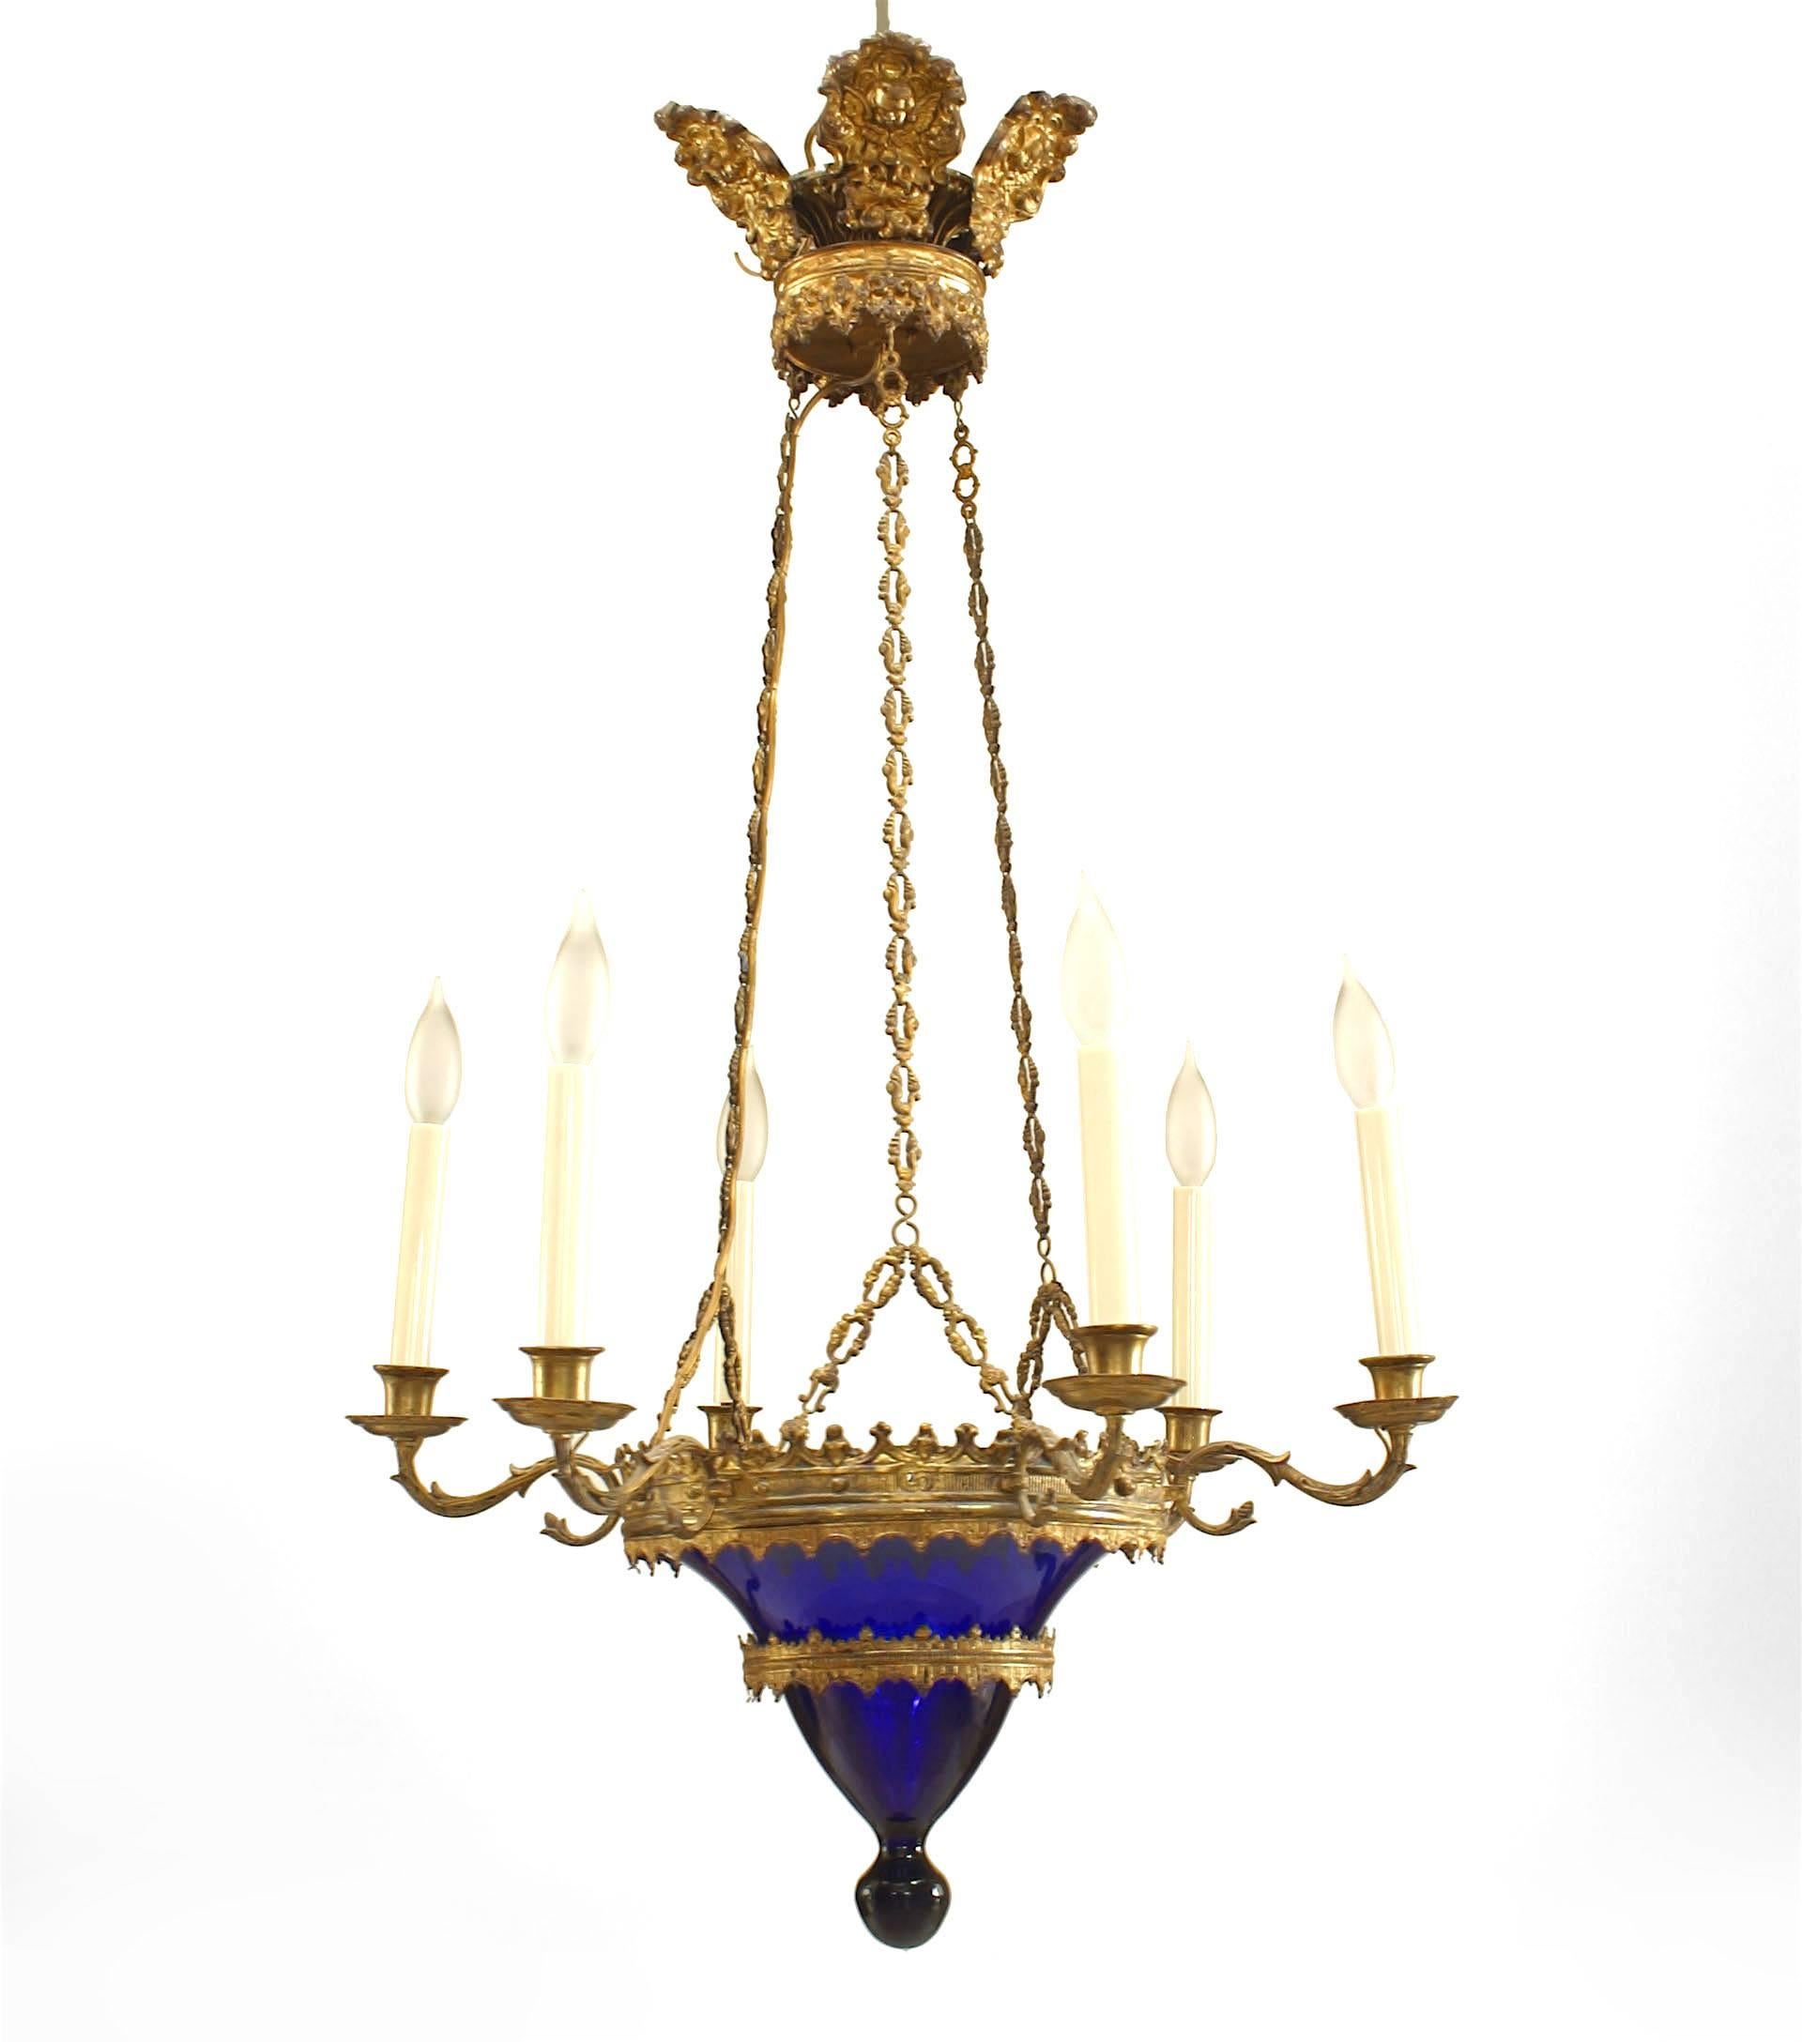 2 Continental Baltic gilt bronze chandeliers with blue glass bowl and finial bottom set in a bronze ring. 6 upturned arms and suspended by 3 chains. (PRICED EACH)
